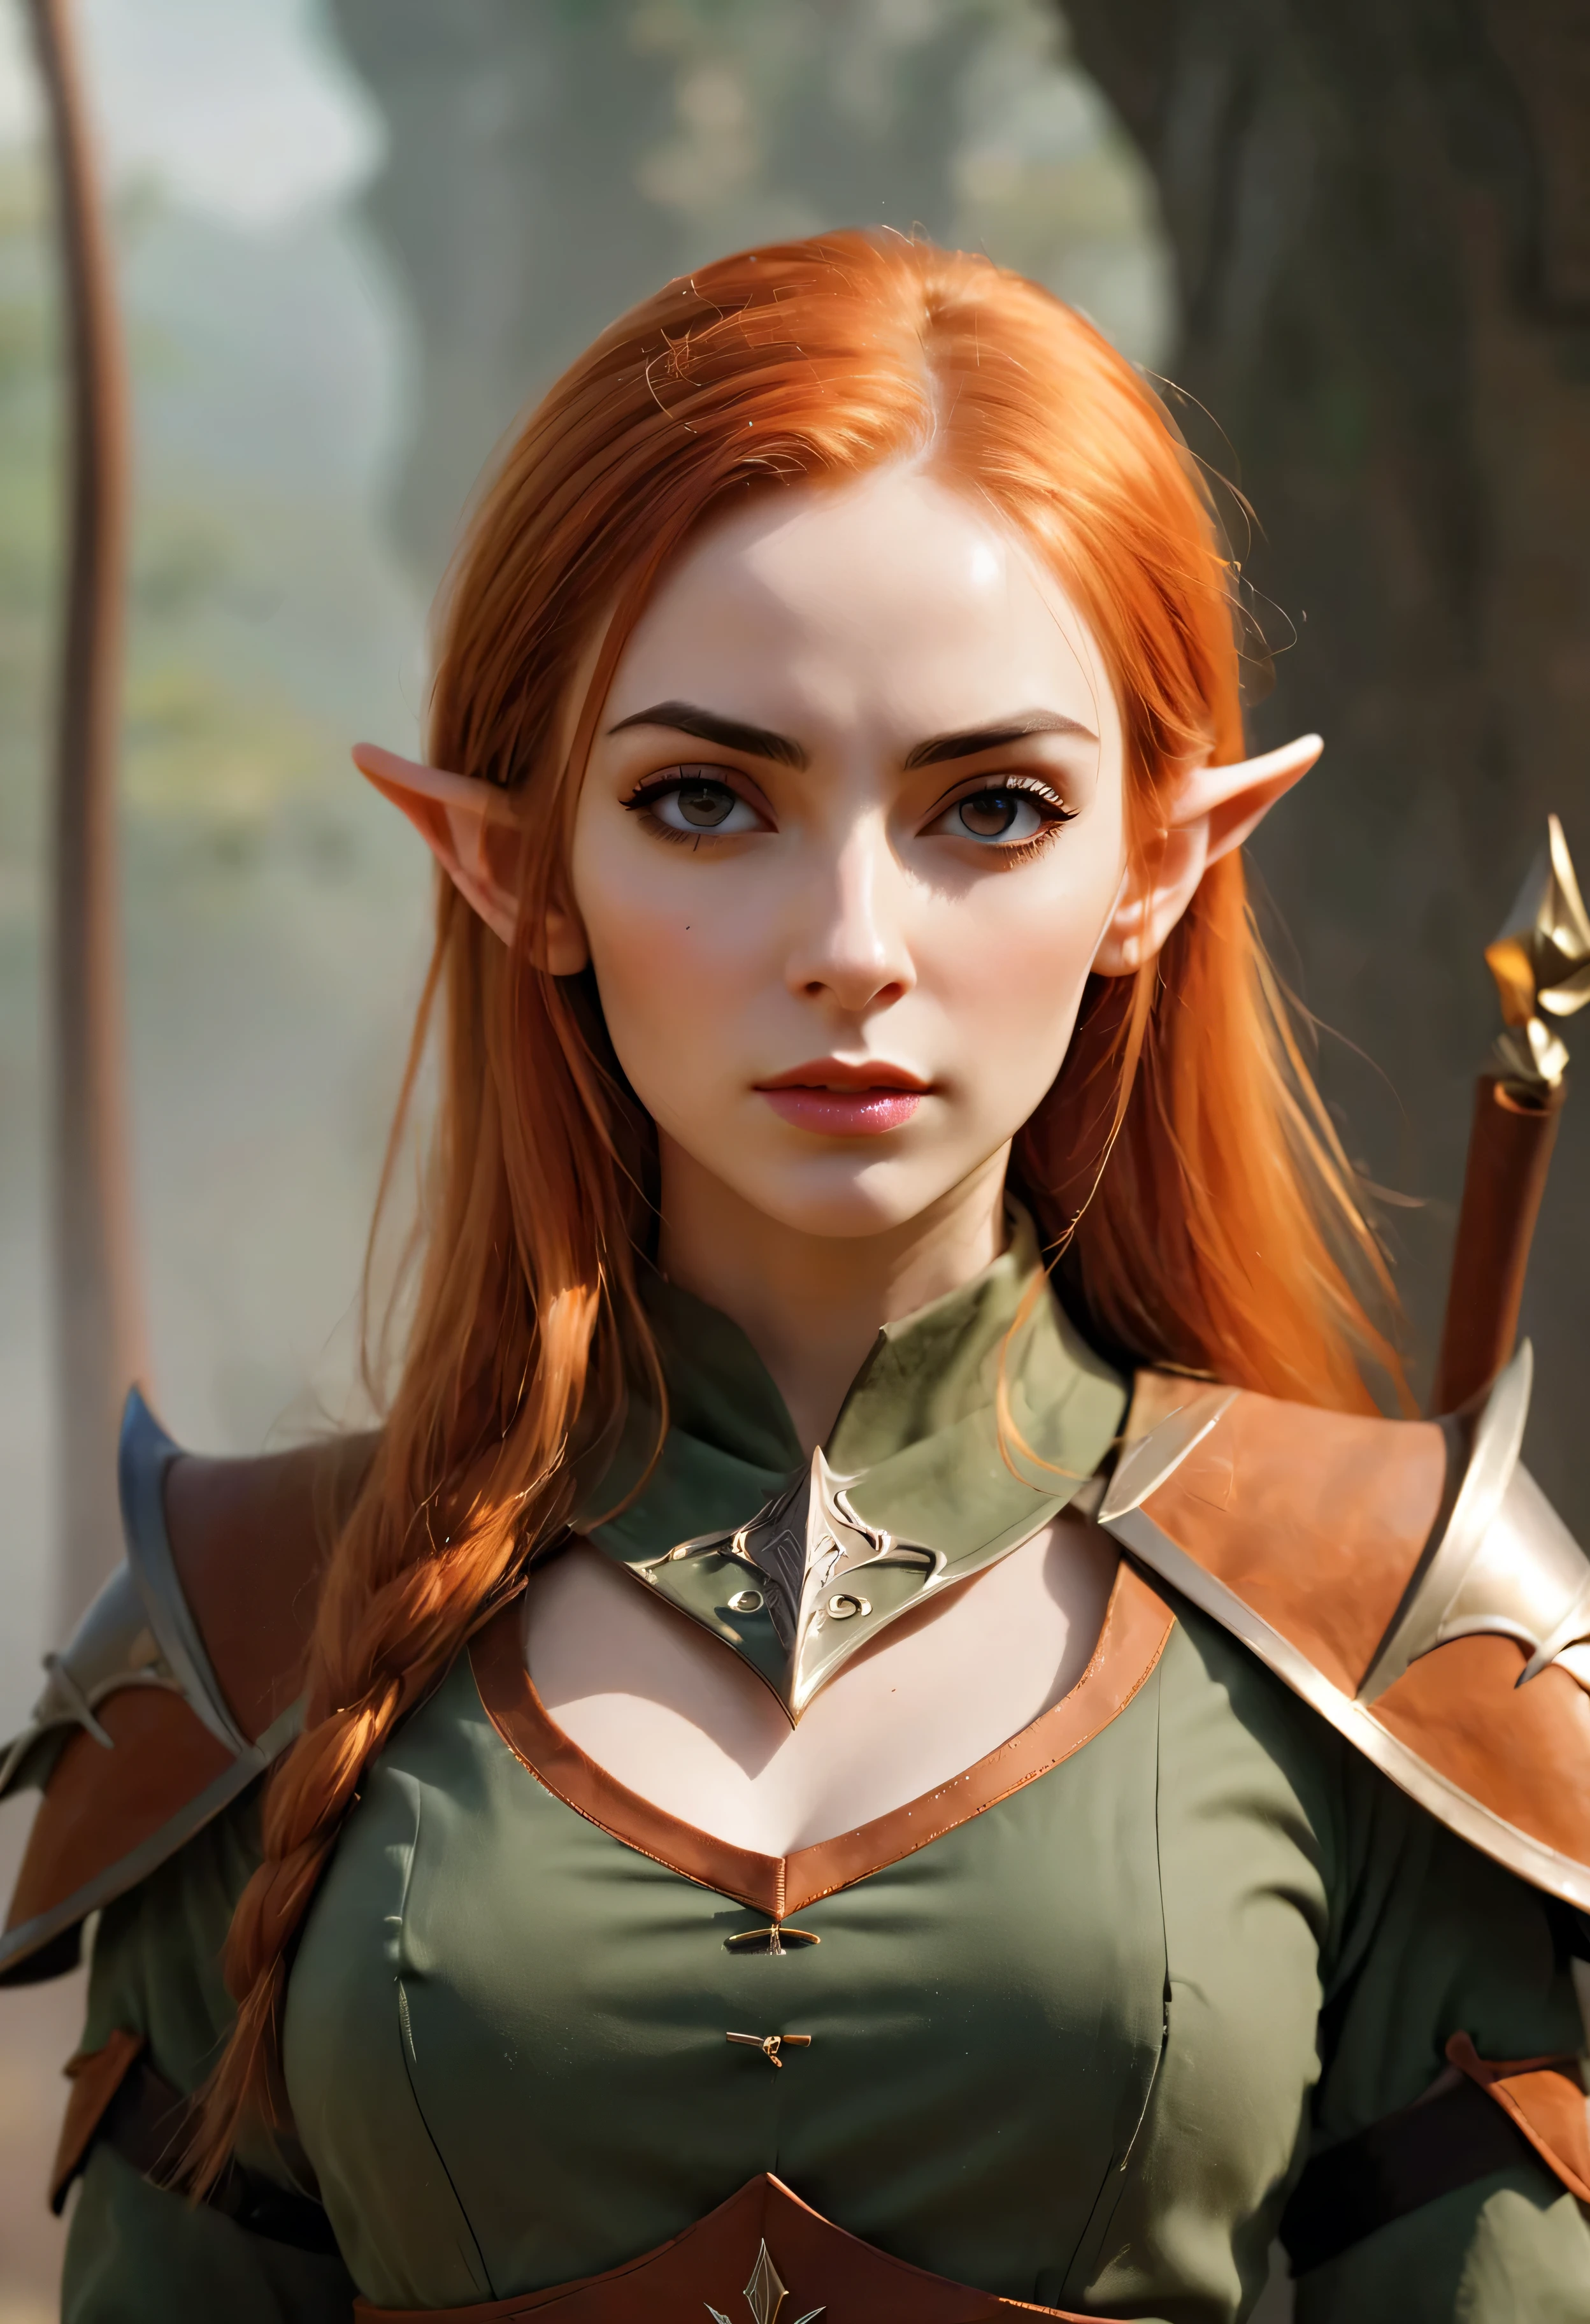 ((Majestic_uniform):1.2), ((Expressive_face:1.2), ((Pretty Elven Soldier):1.1), ((Hourglass_figure):1.1). ((Stand Ready):1.3), | Smooth lines, showing expressions and postures through contrast, Photograph of Auburn Elven Female soldier, fine photography, hot topic, figurative art, fantasy movie.